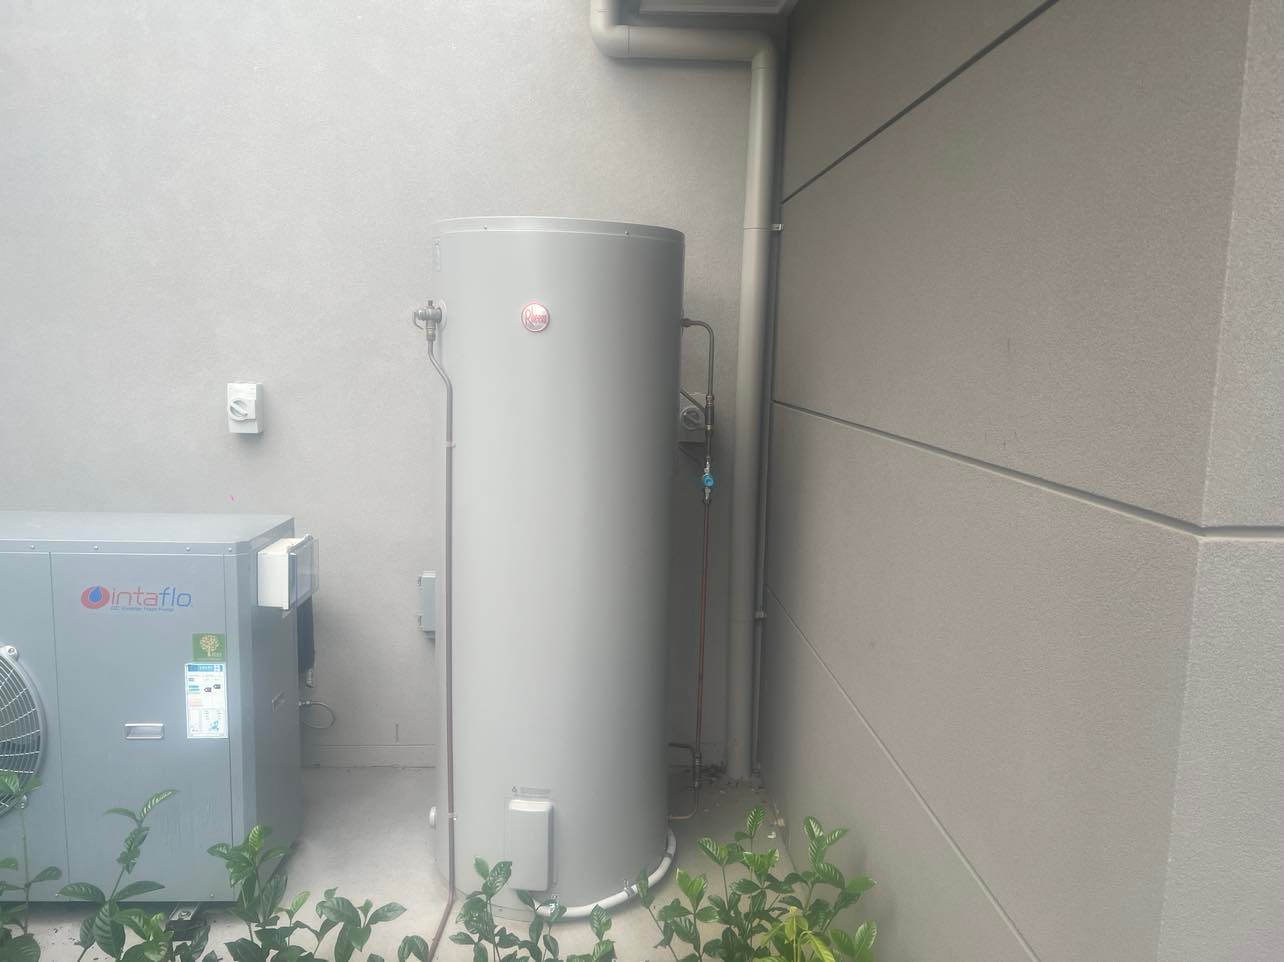 Rheem Electric Hot Water Heater installed by Hills District Plumbing 1